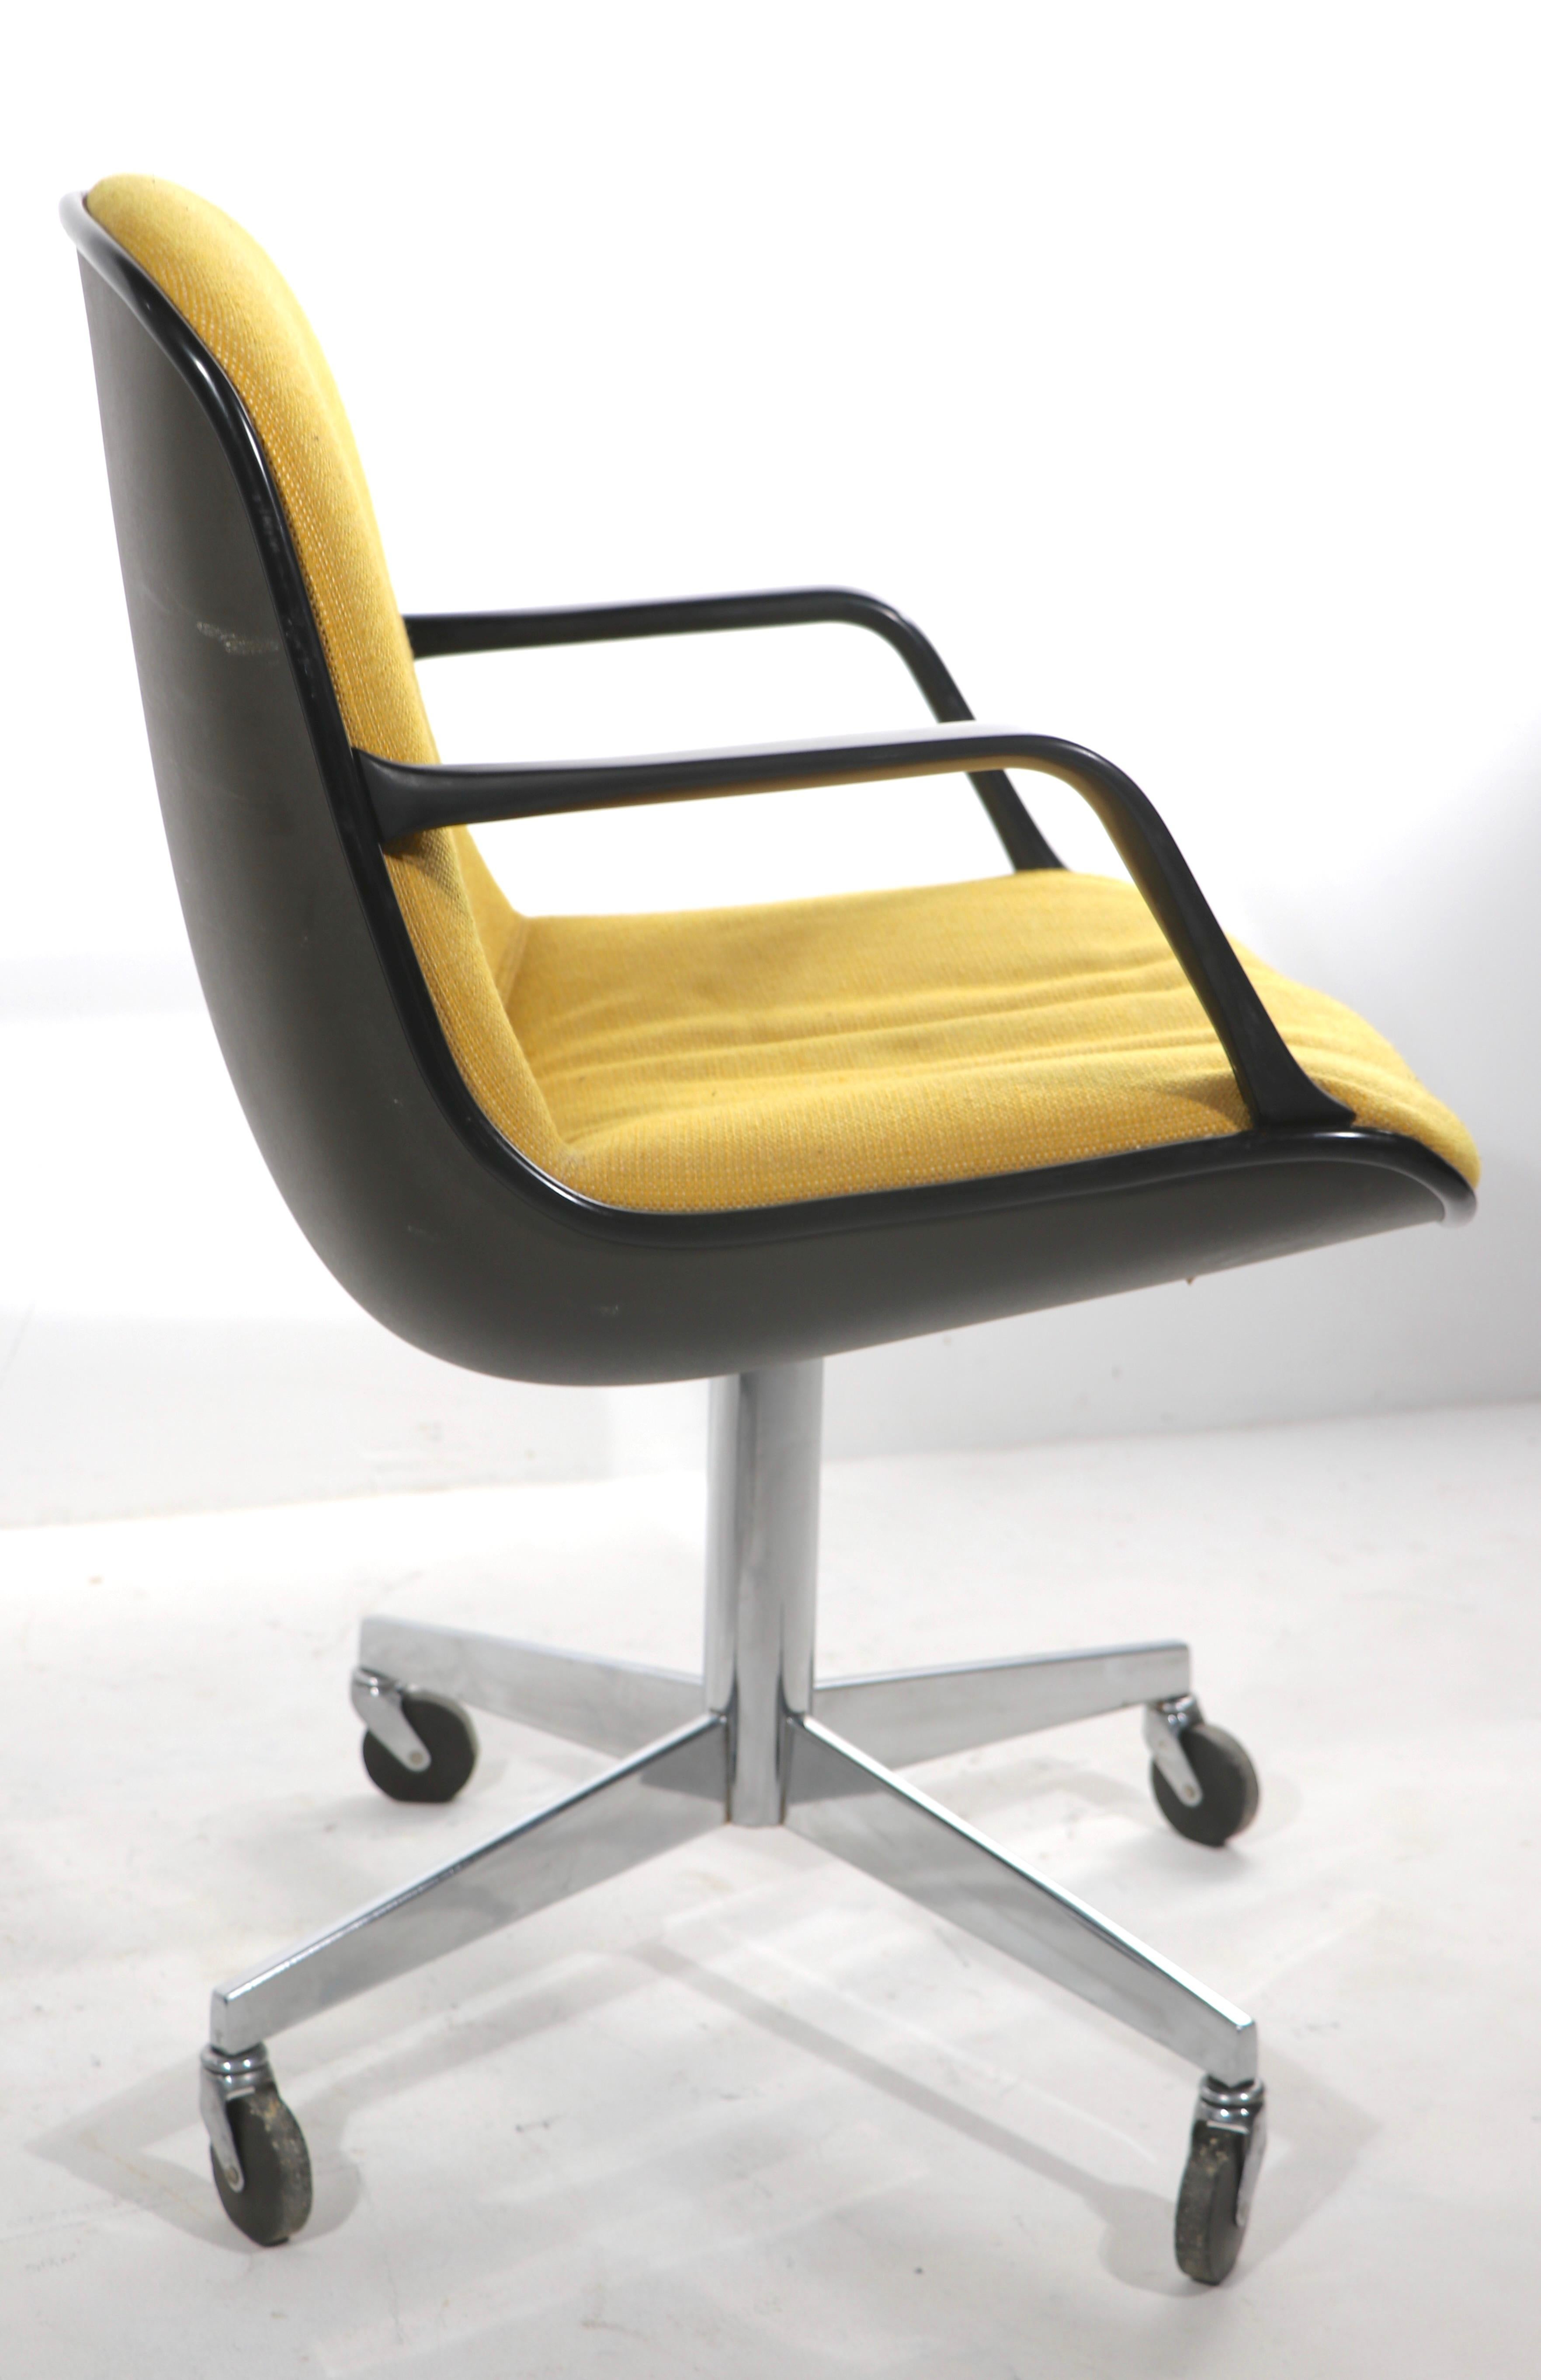 1970s steelcase office chair